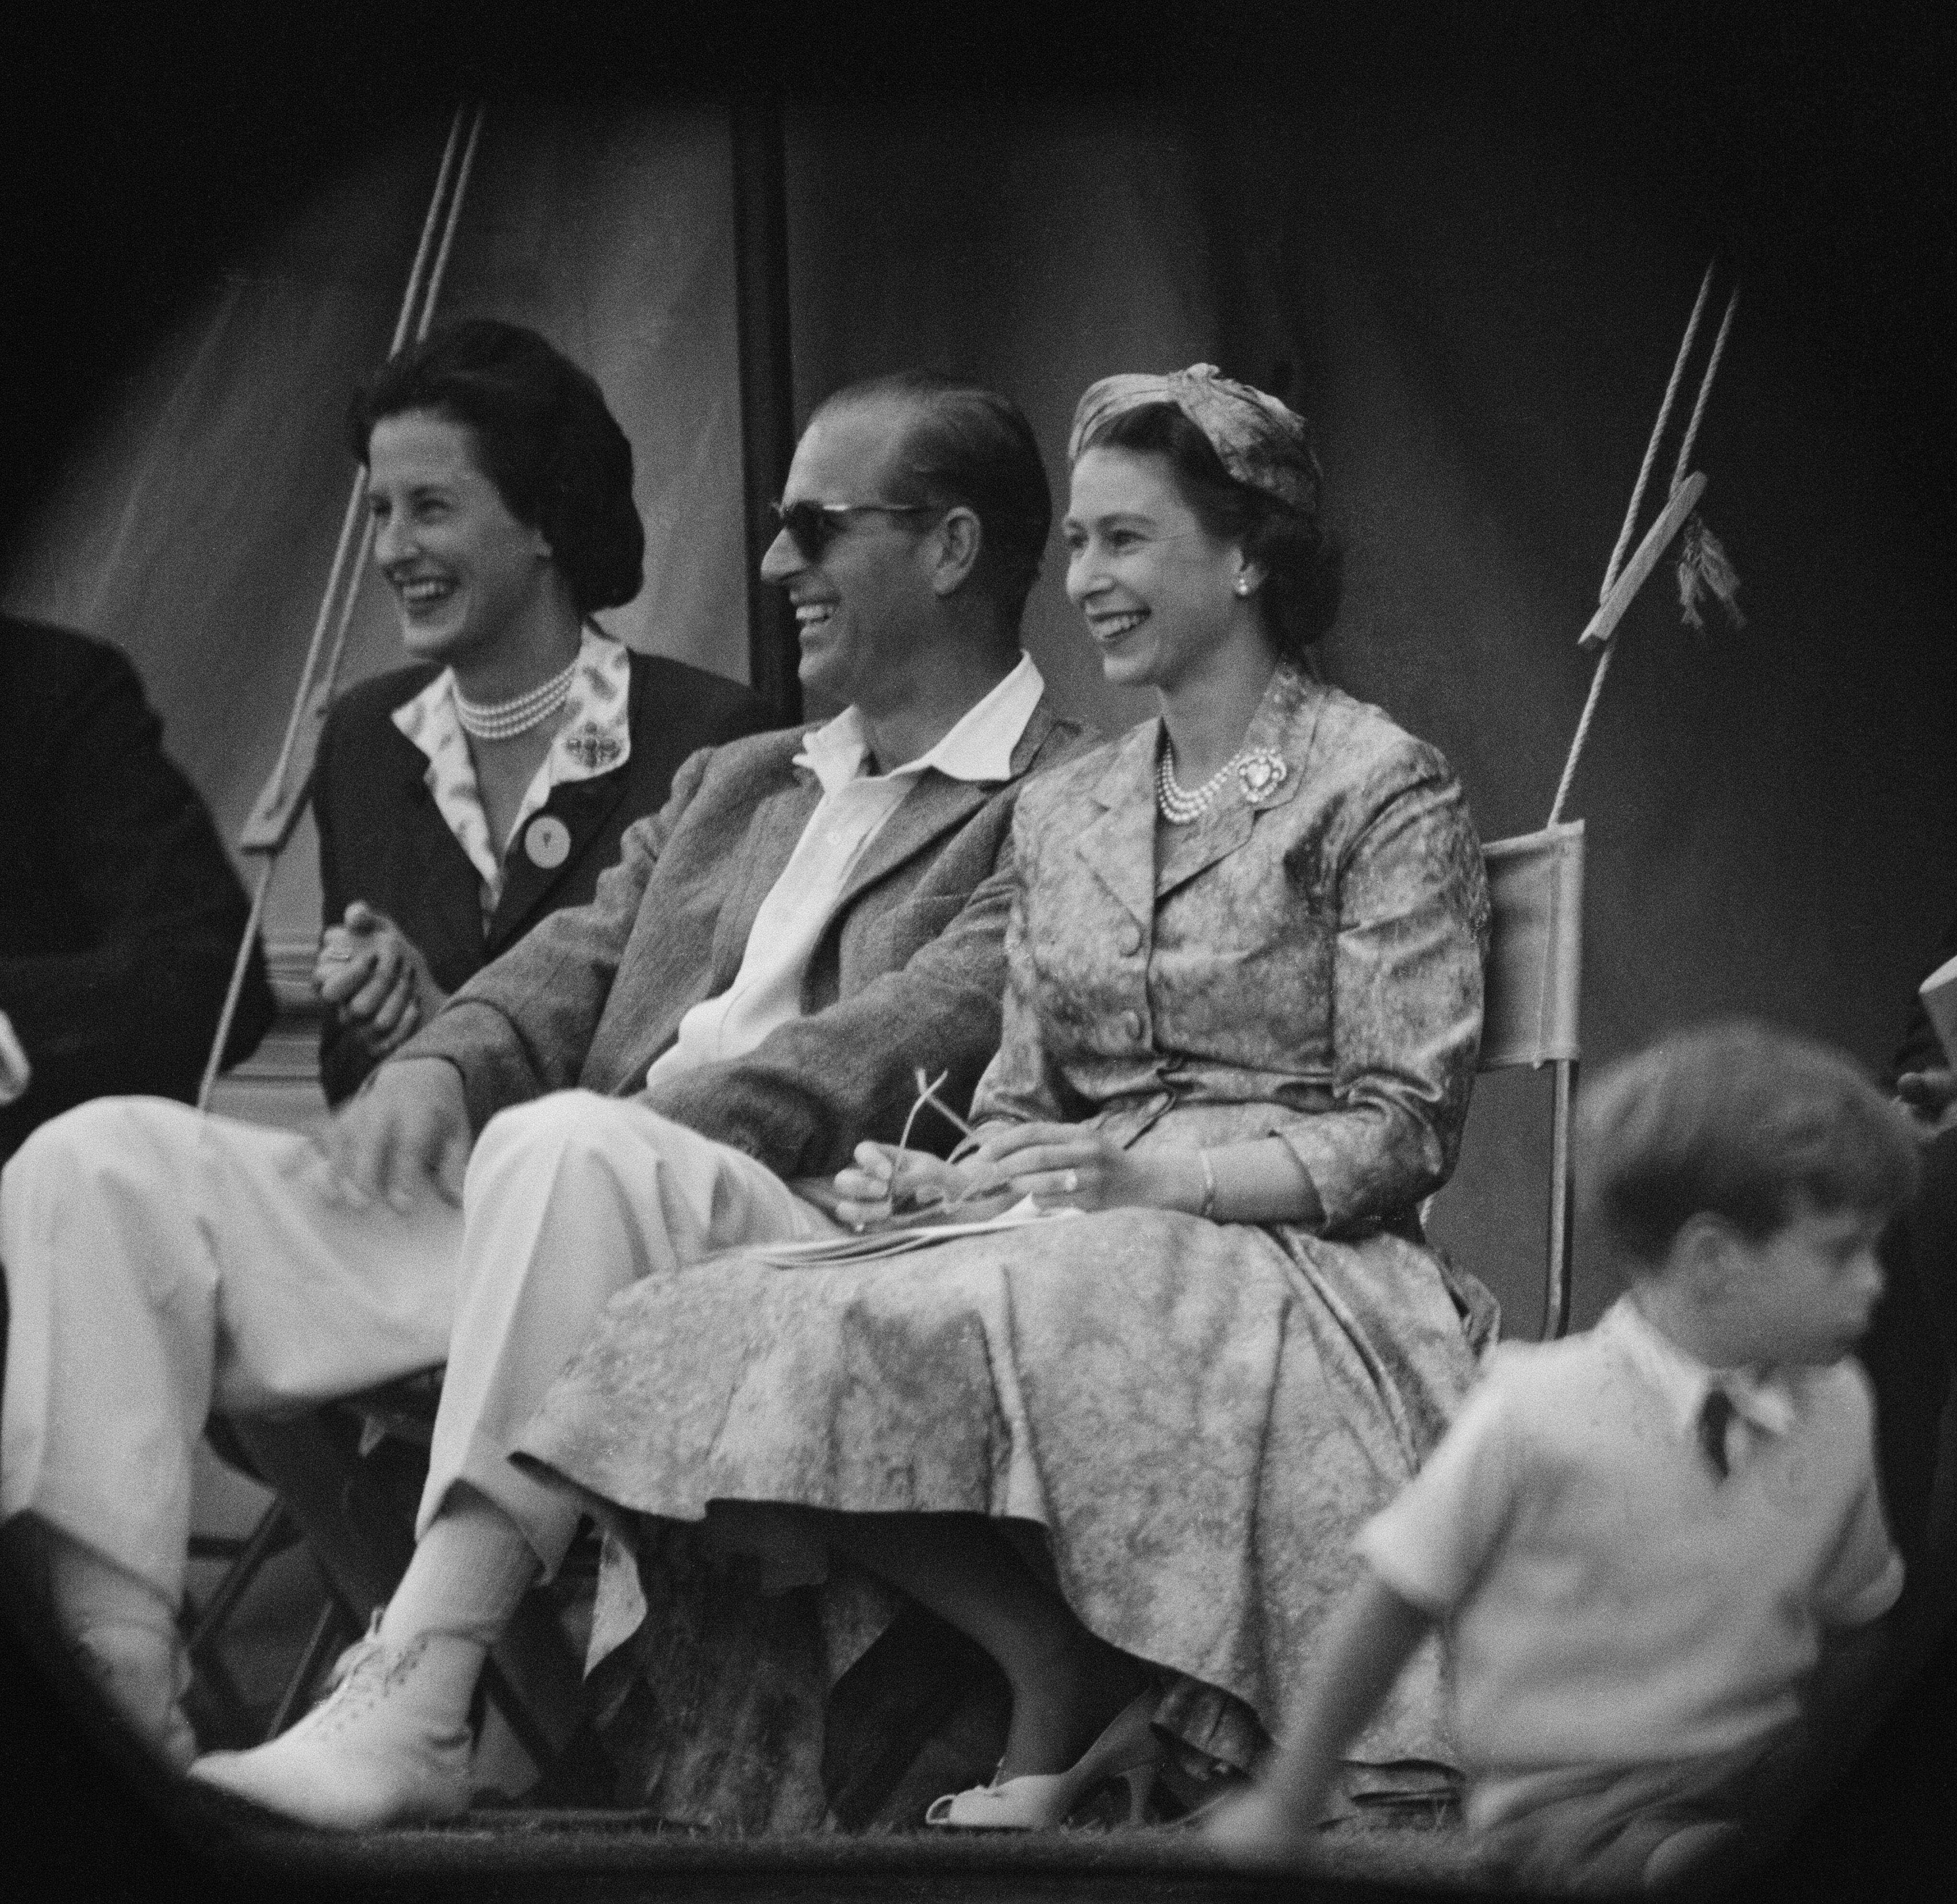 Queen Elizabeth II and Prince Philip, Duke of Edinburgh watch a cricket match at Highclere Castle, Highclere, Hampshire | Getty Images